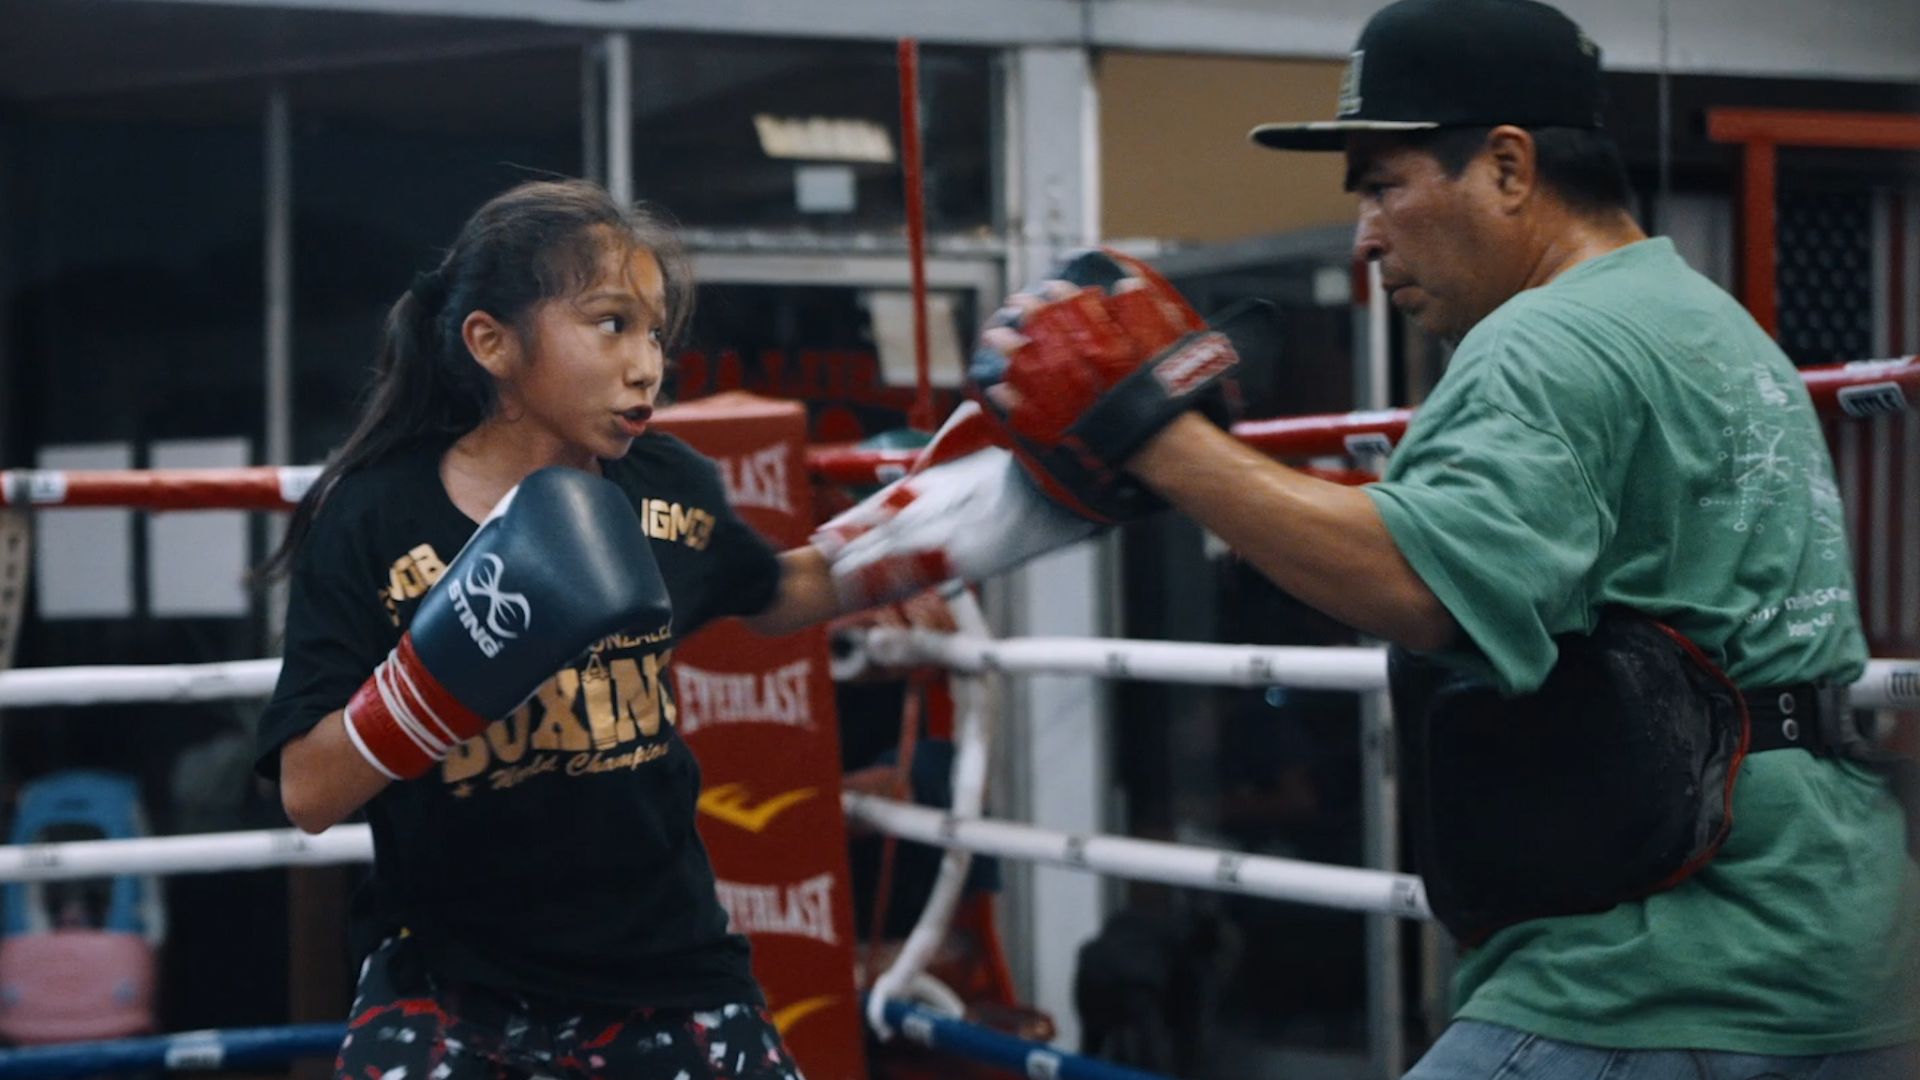 Watch A 12-Year-Old Boxing Champion and Her Road to Olympic Gold